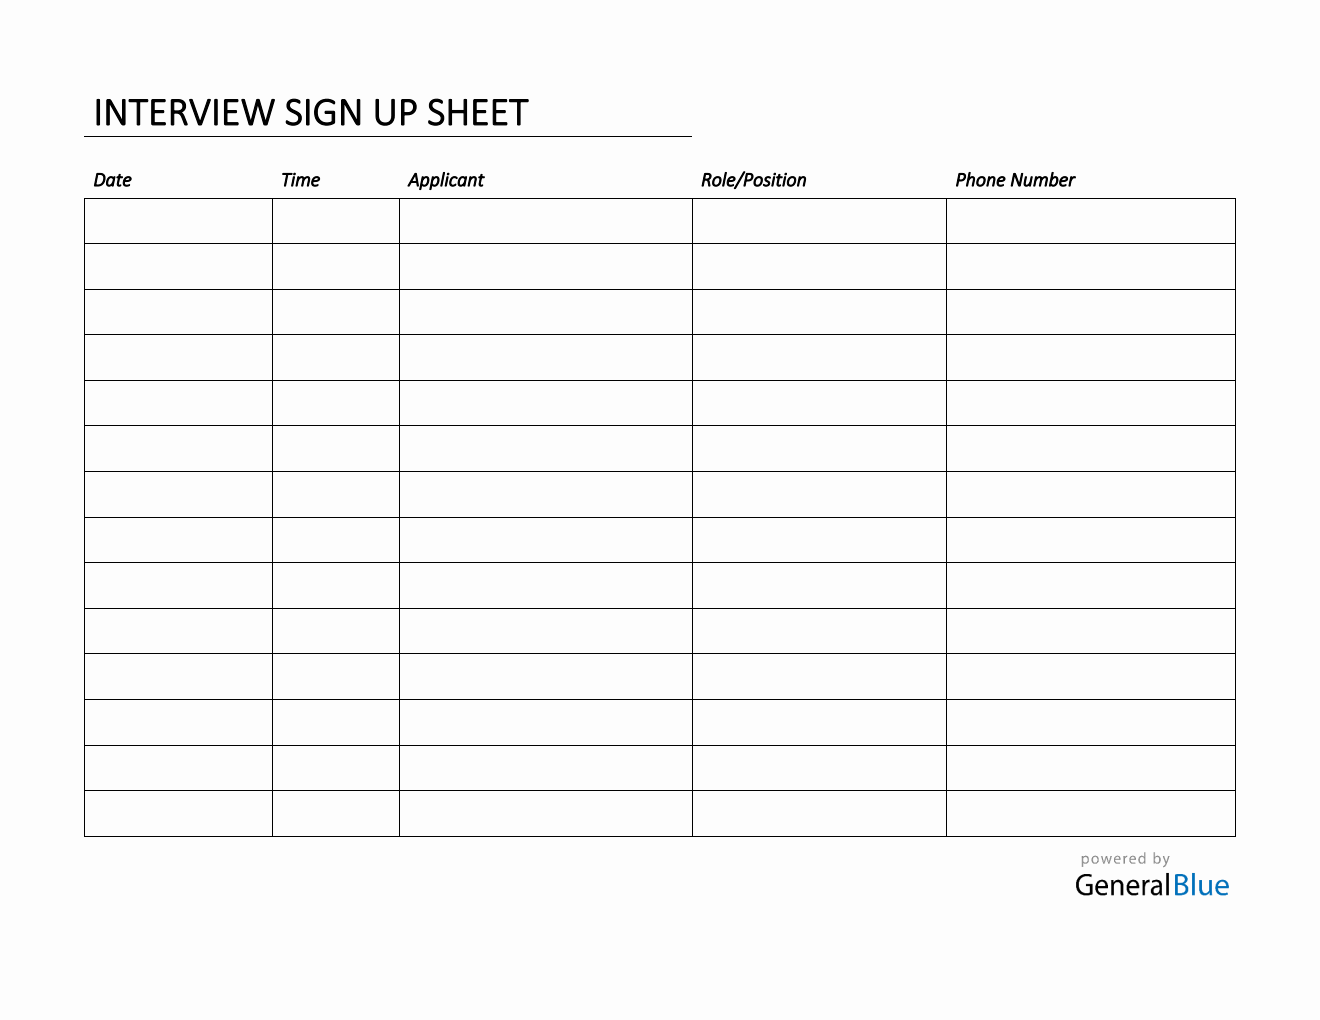 Interview Sign Up Sheet Template in PDF (Simple)